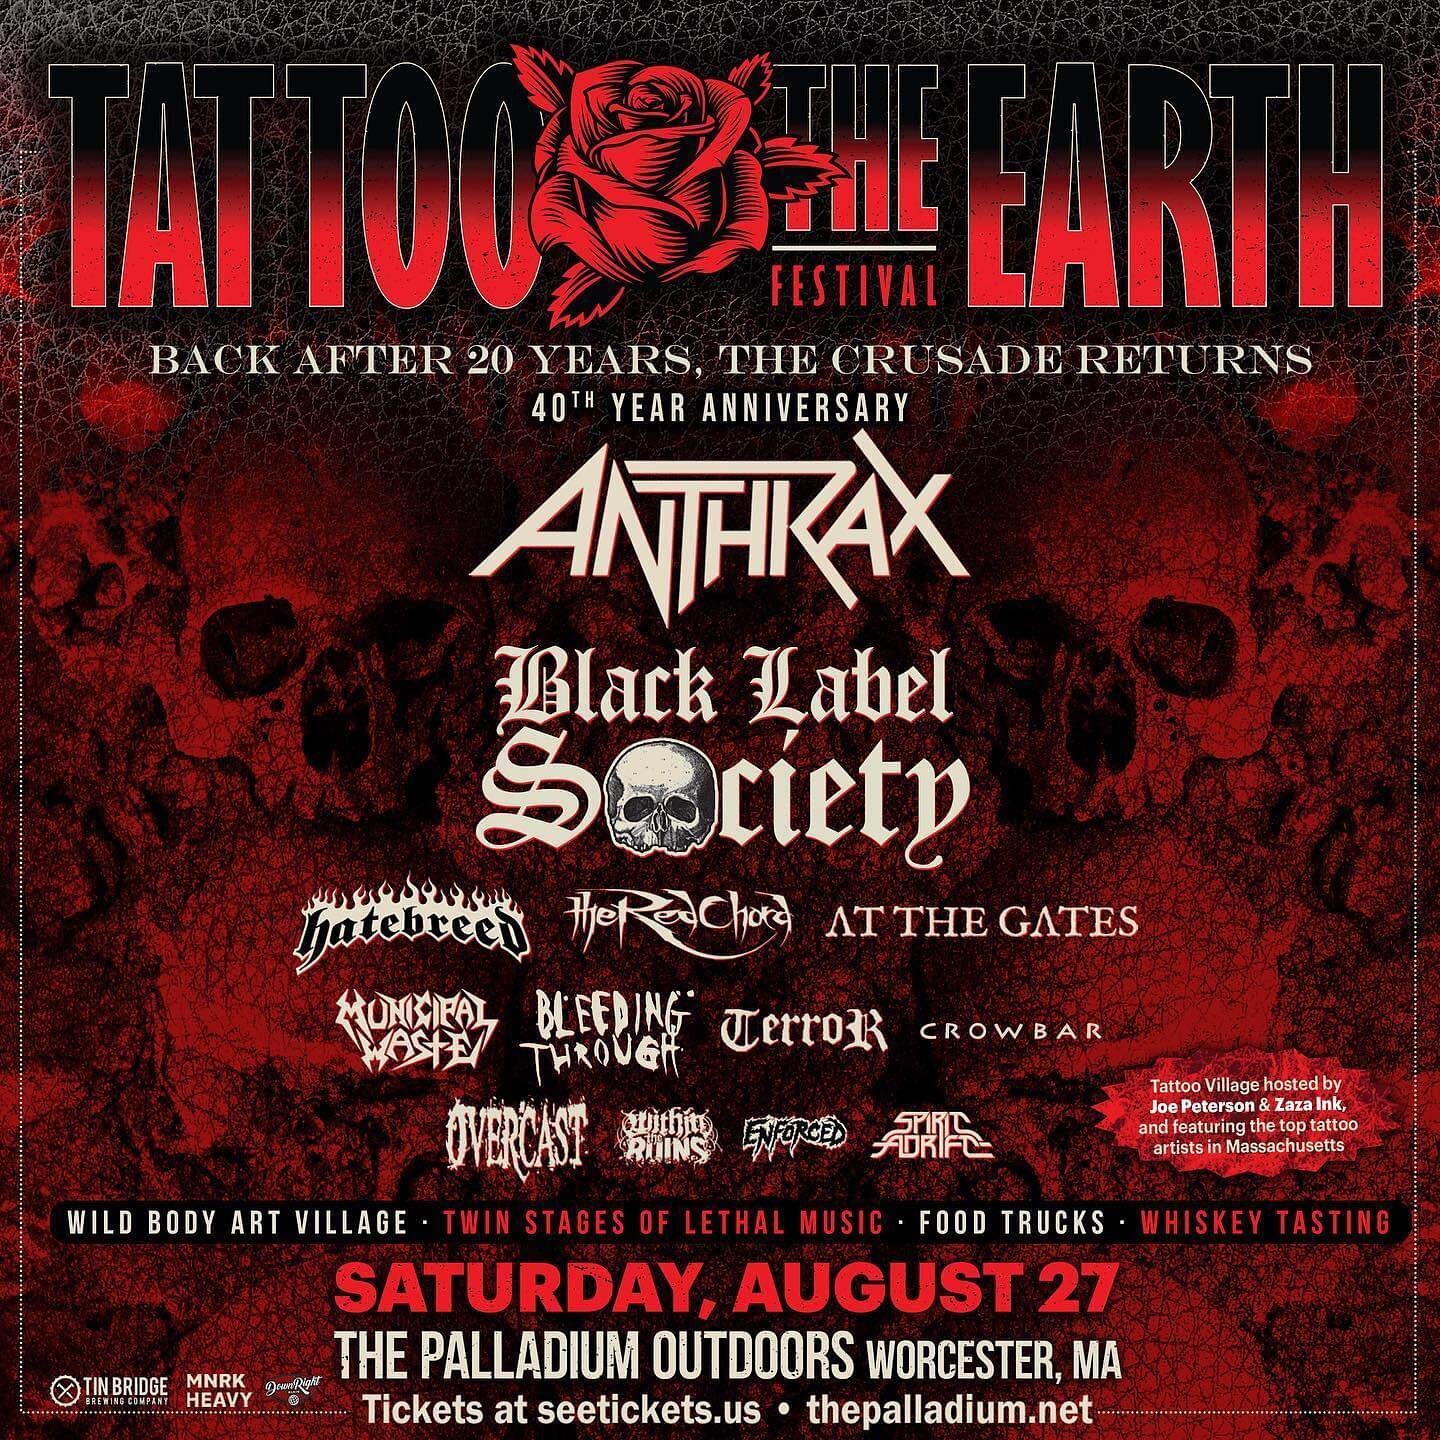 Tattoo the Earth Festival is BACK on August 27 in Worcester, MA with Overcast, Anthrax, BLS, Hatebreed, Bleeding Through, Terror and more! Get tickets and info at TattooTheEarthFestival.com